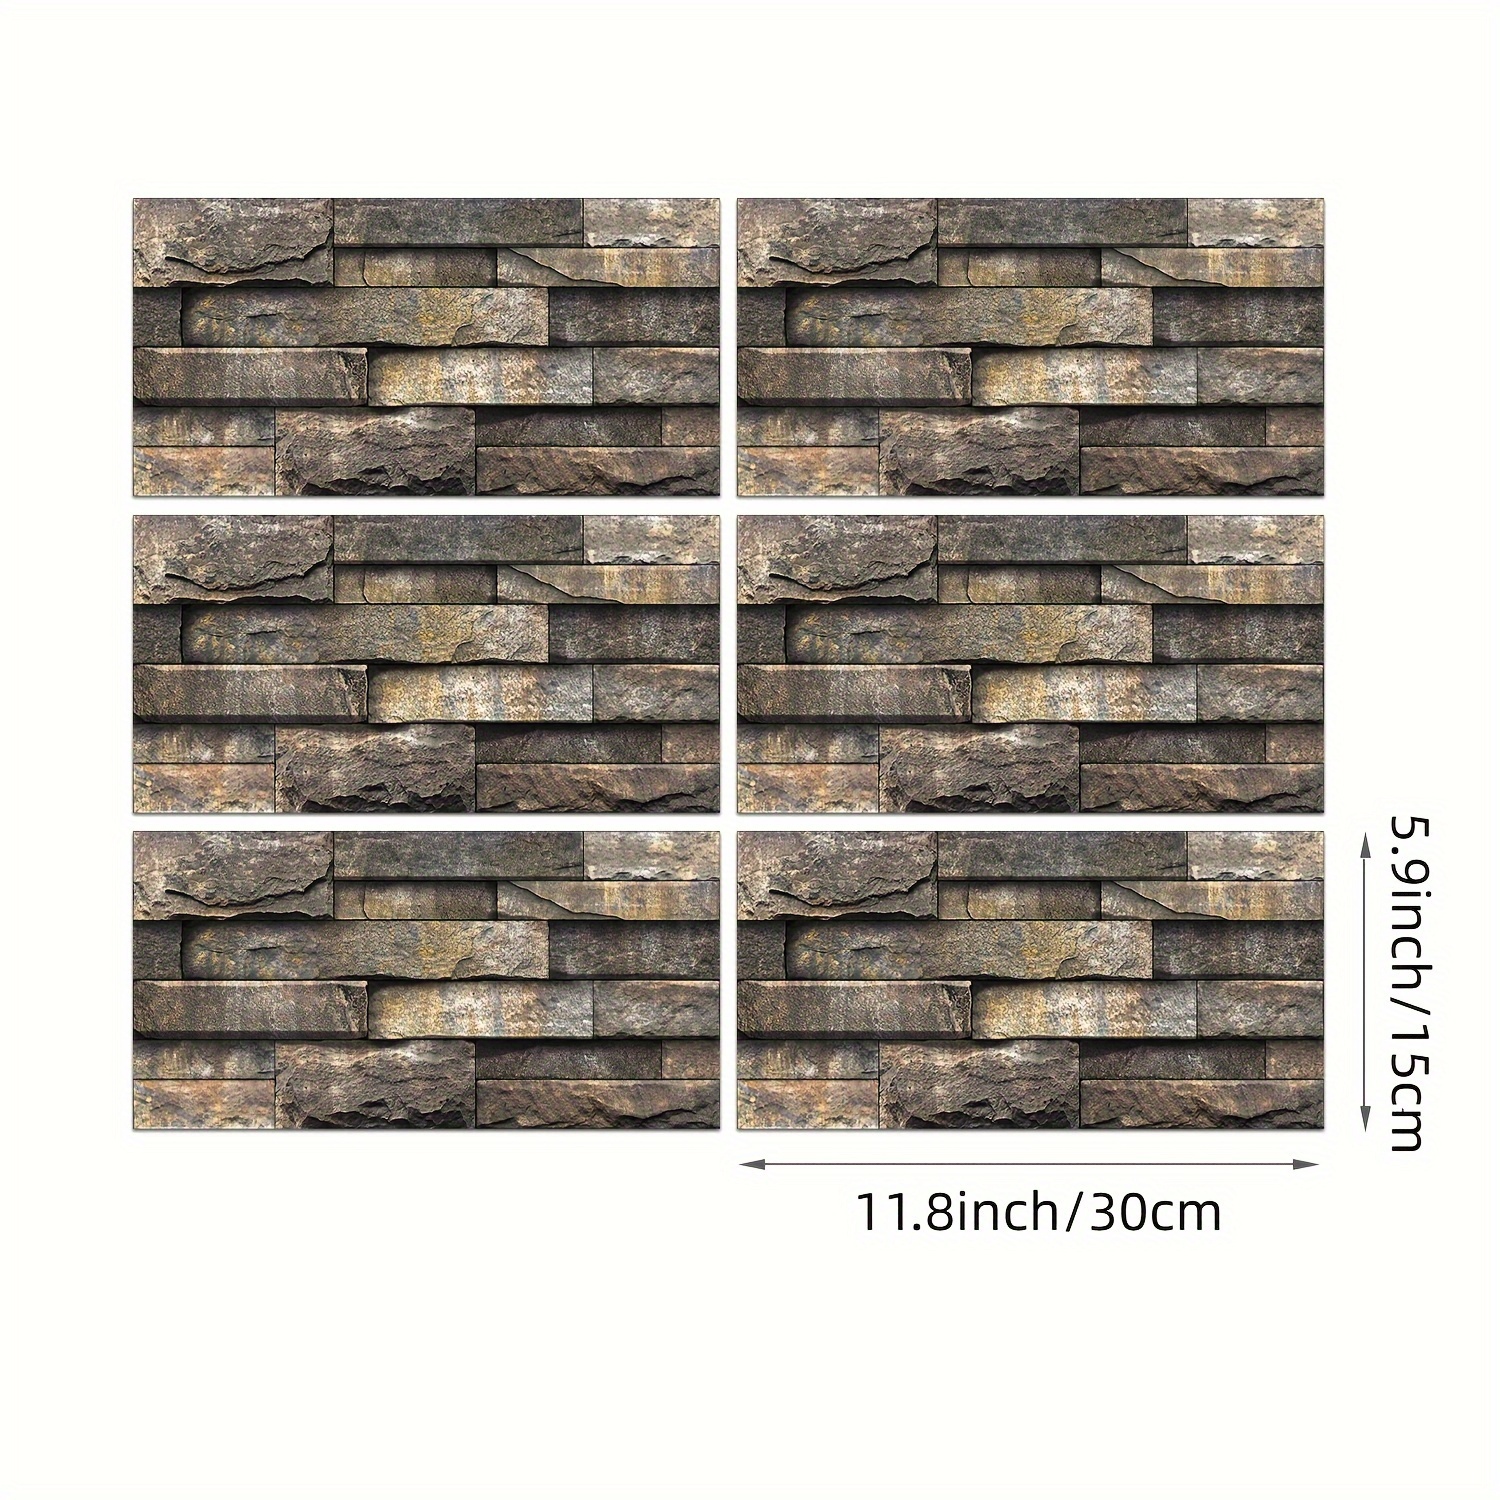 6 12pcs faux stone effect non 3d brick wall tile stickers diy self adhesive waterproof sticky wallpaper kitchen bathroom tile wall art decals home decoration 5 9inch x 11 8inch